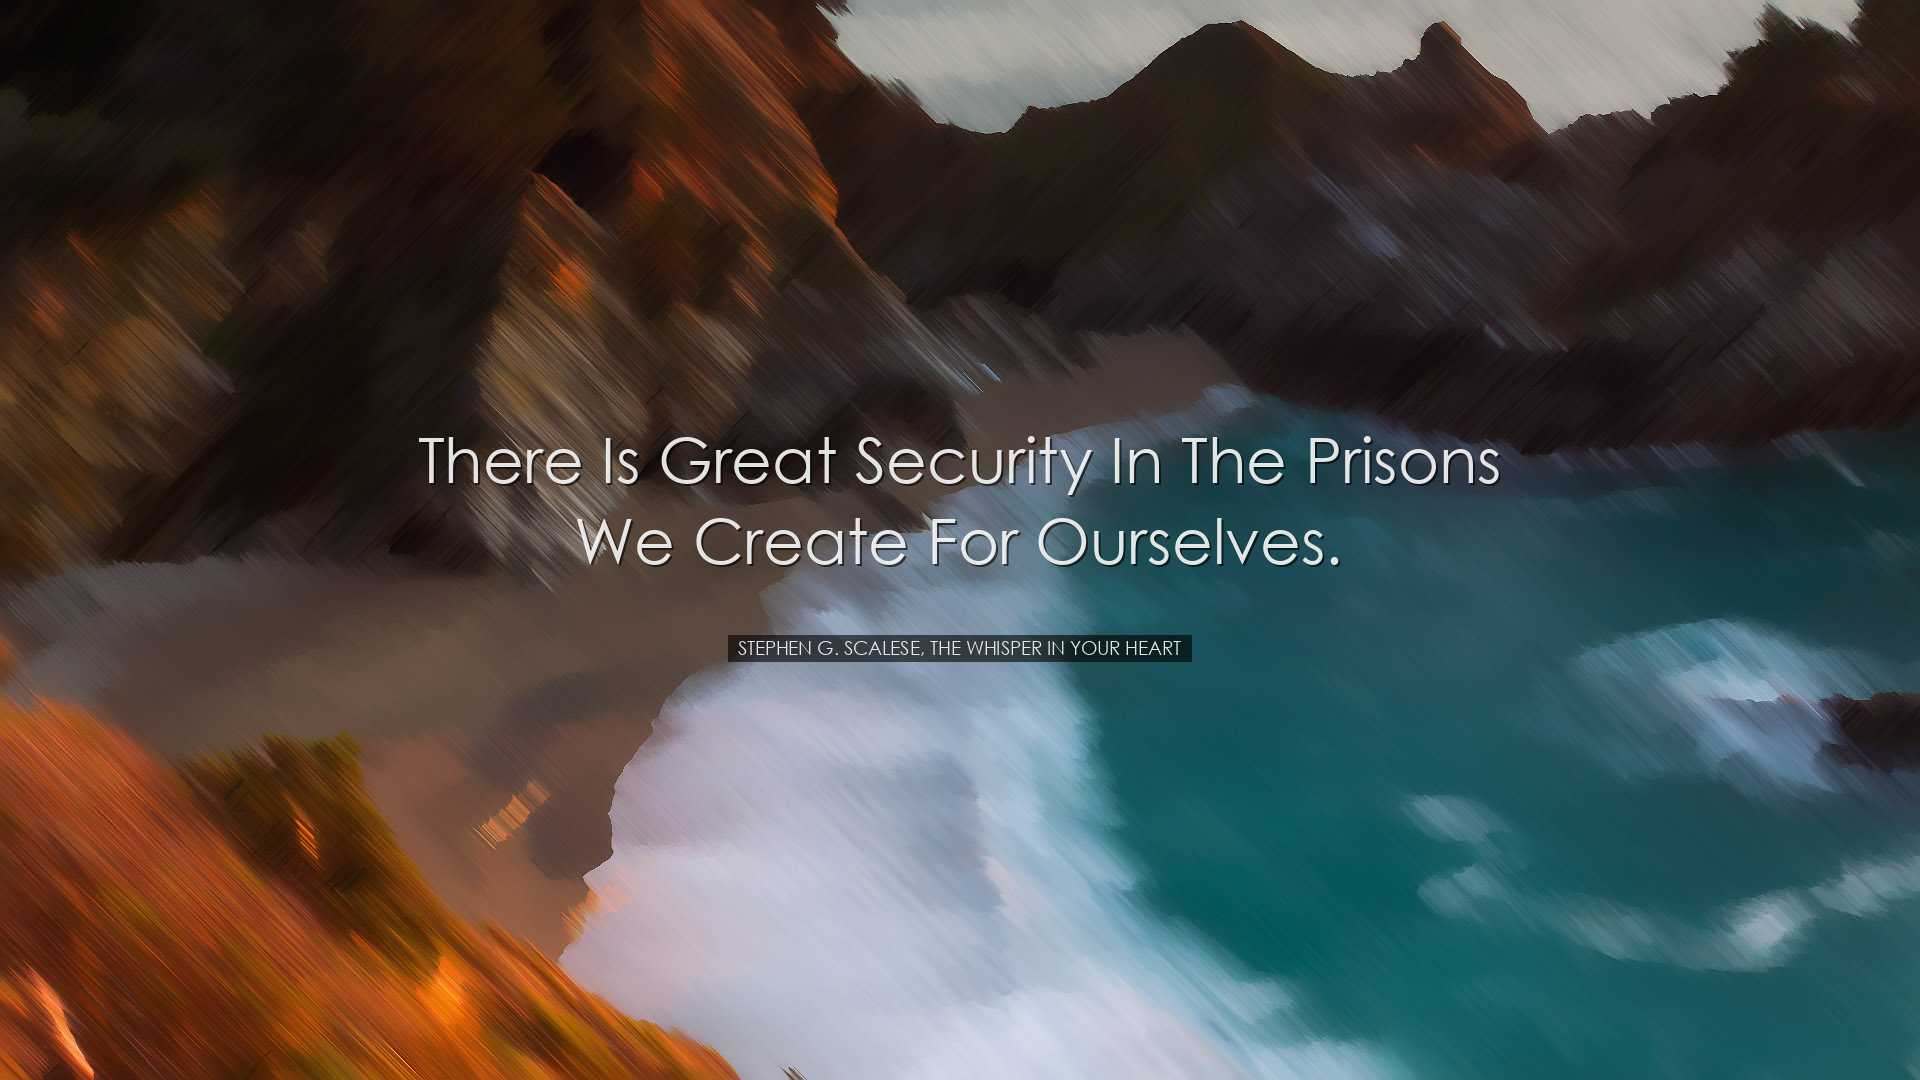 There is great security in the prisons we create for ourselves. -